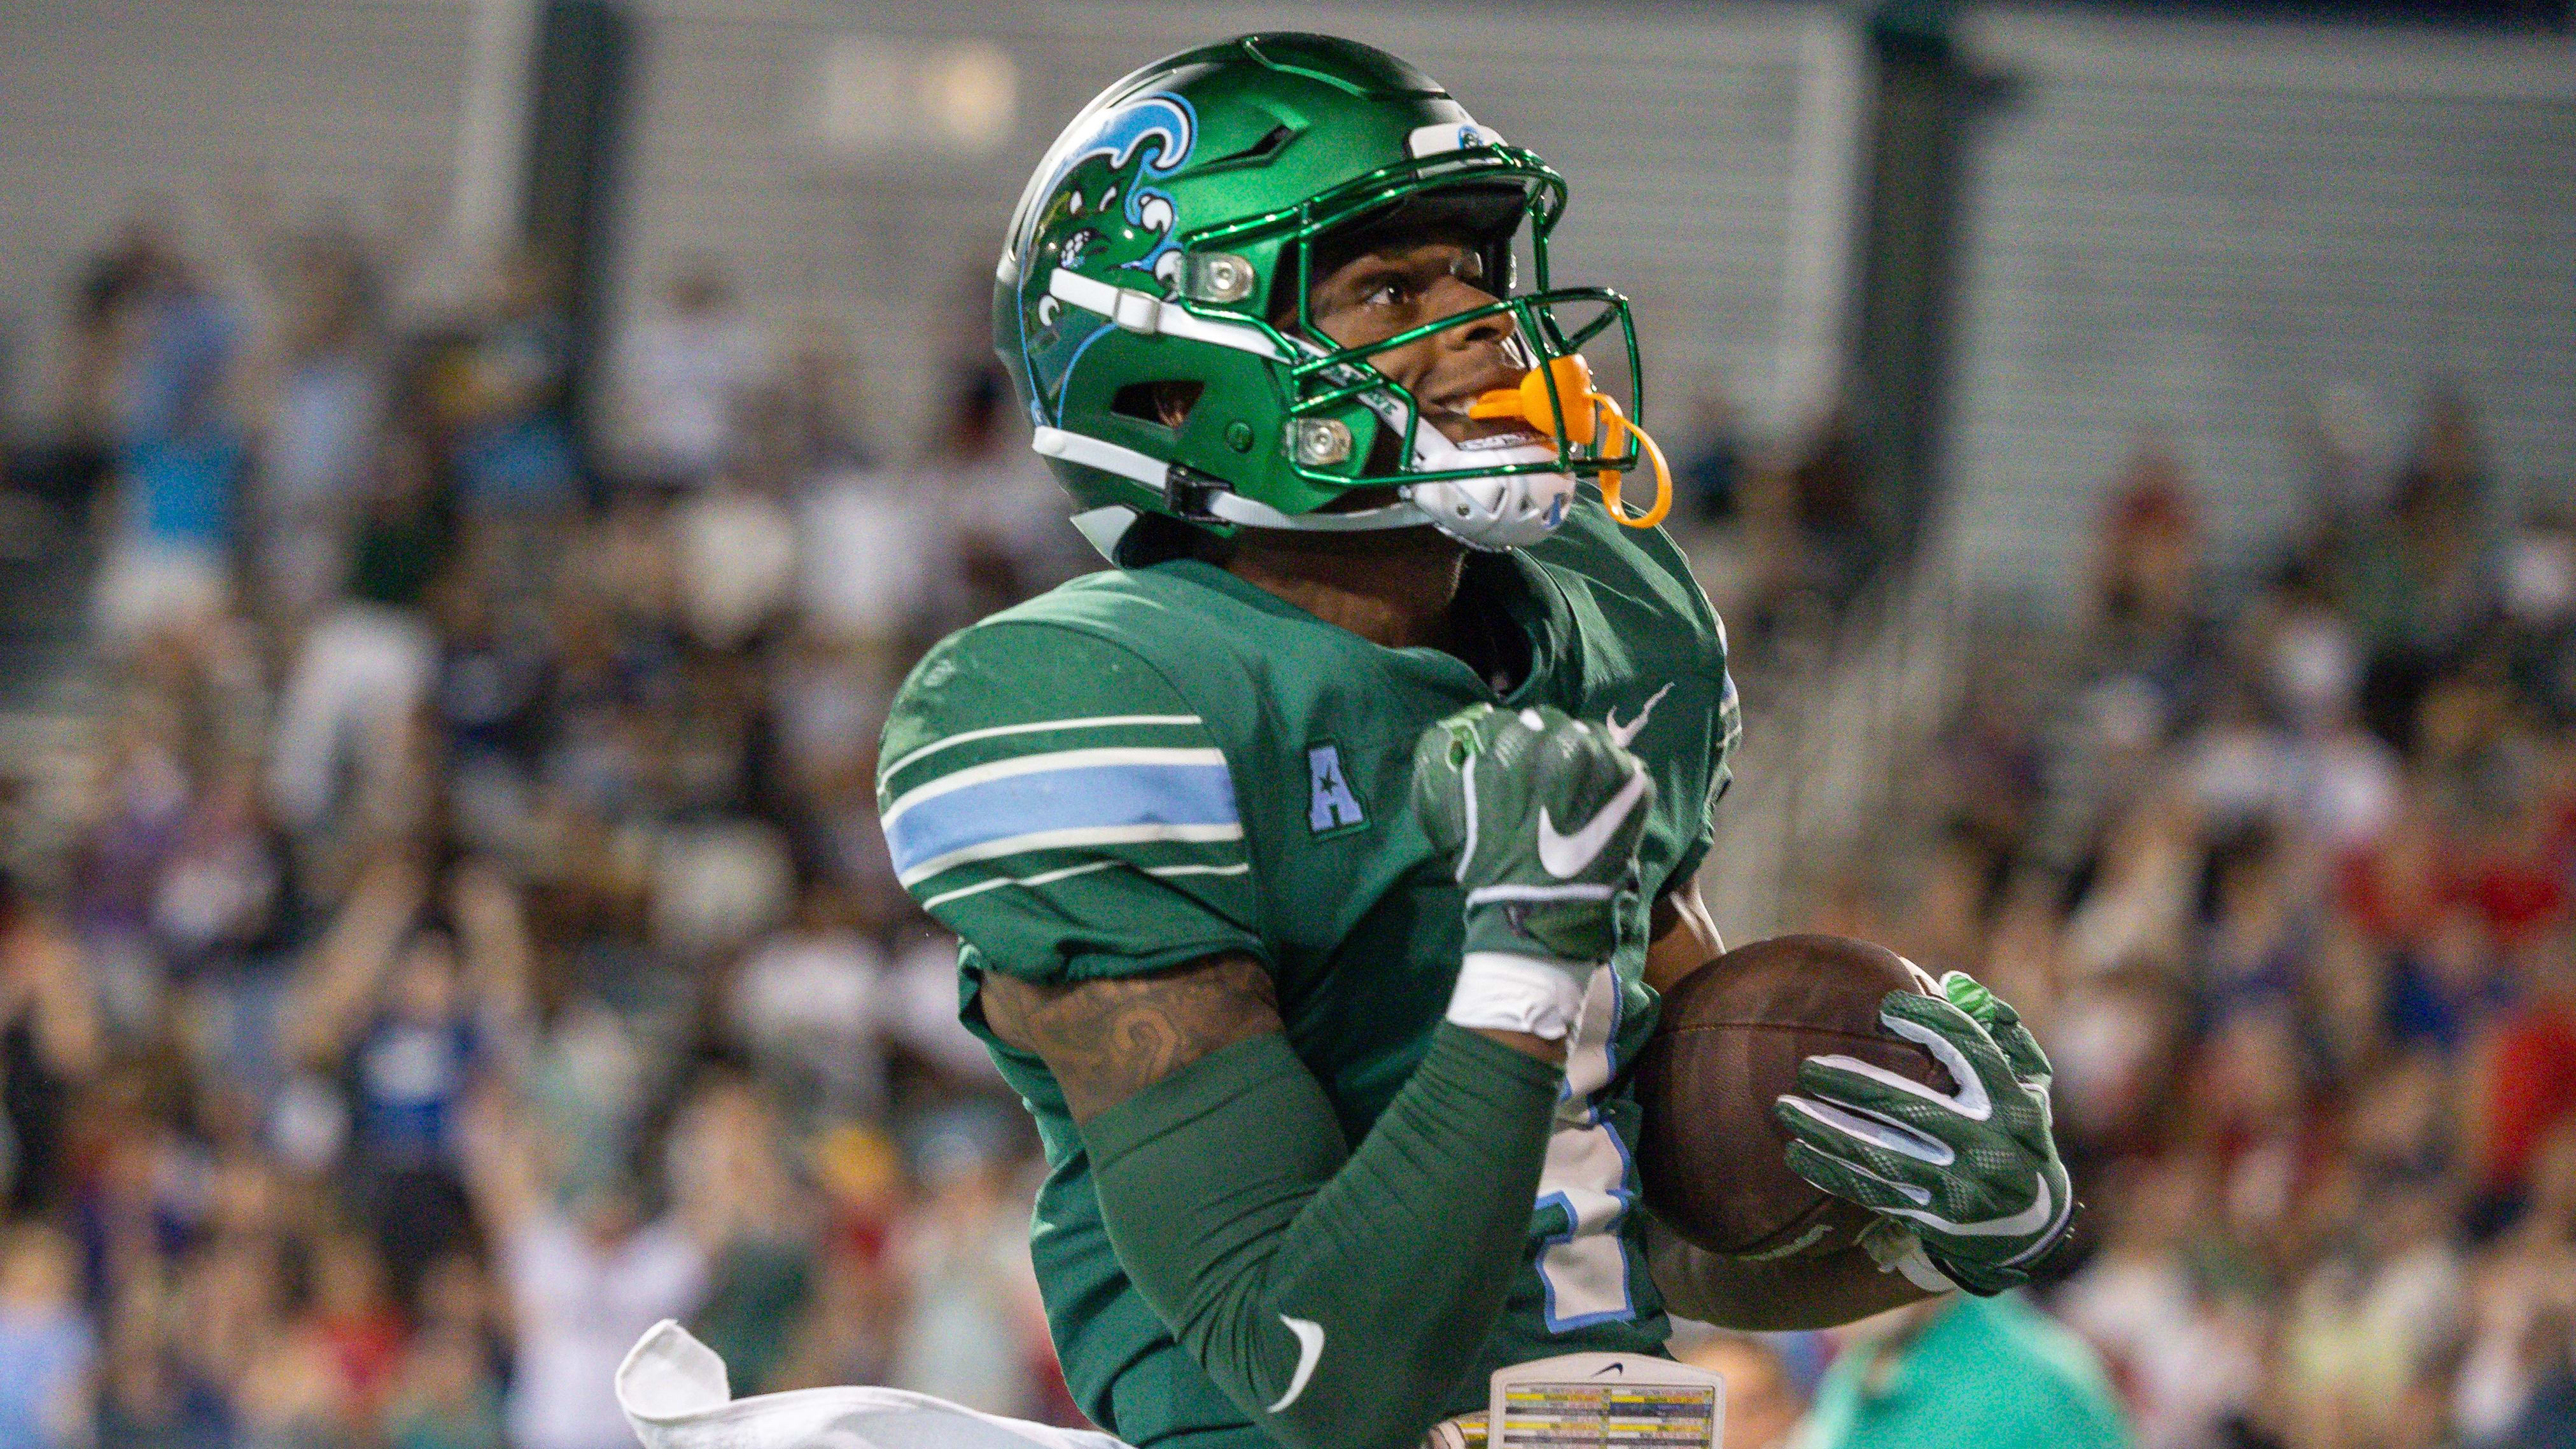 NFL Draft: Tulane’s Jha’Quan Jackson Selected By Tennessee in NFL Draft